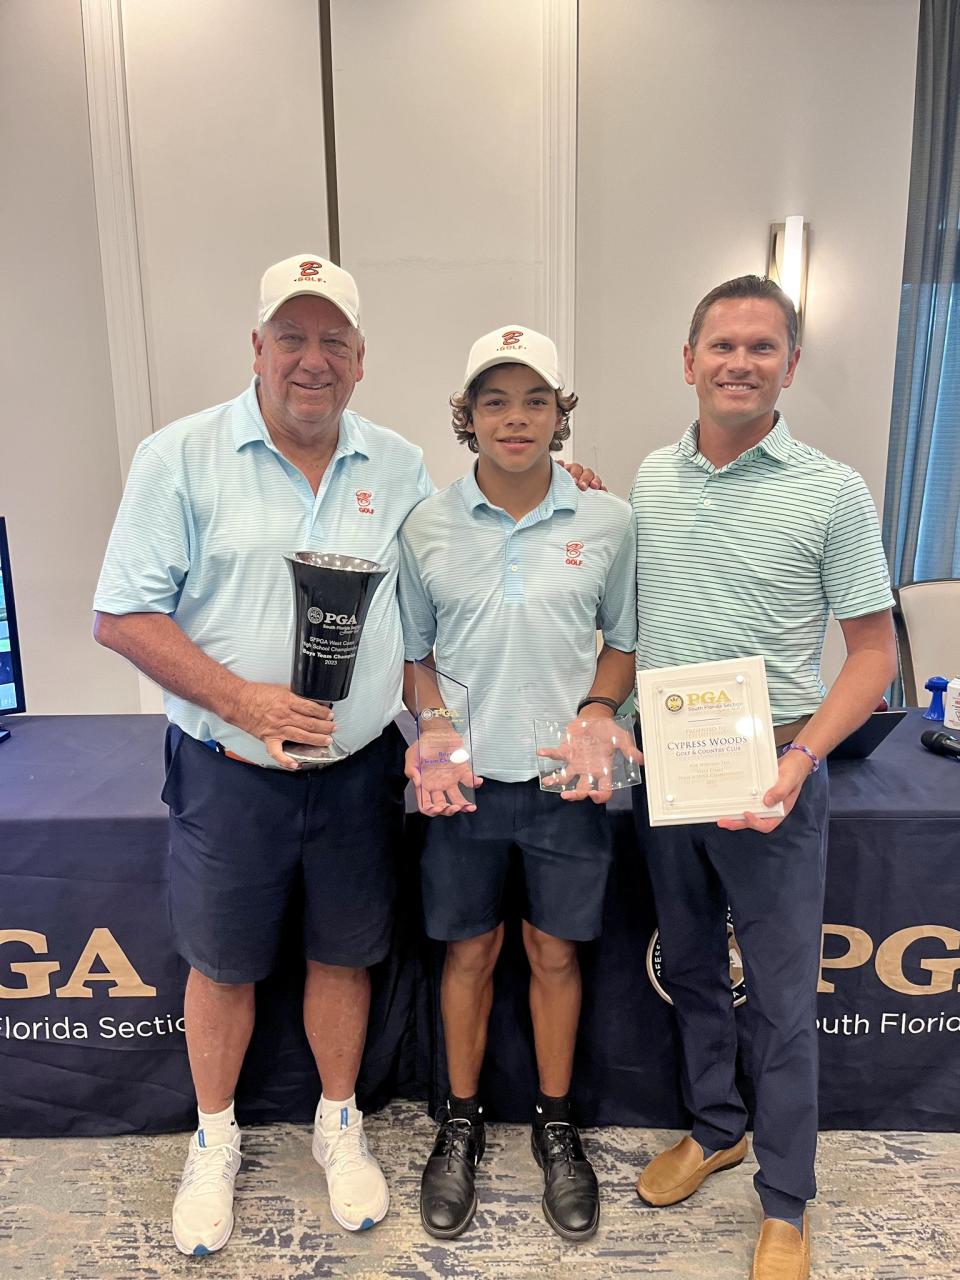 Alongside Benjamin coach Toby Harbeck (left), 14 year-old Charlie Woods (middle) shows off his trophy haul after shooting a 102 to be the individual champ of the SFPGA's West Coast High School tournament at Cypress Woods Golf and Country Club in Naples on Sept. 30, 2023.